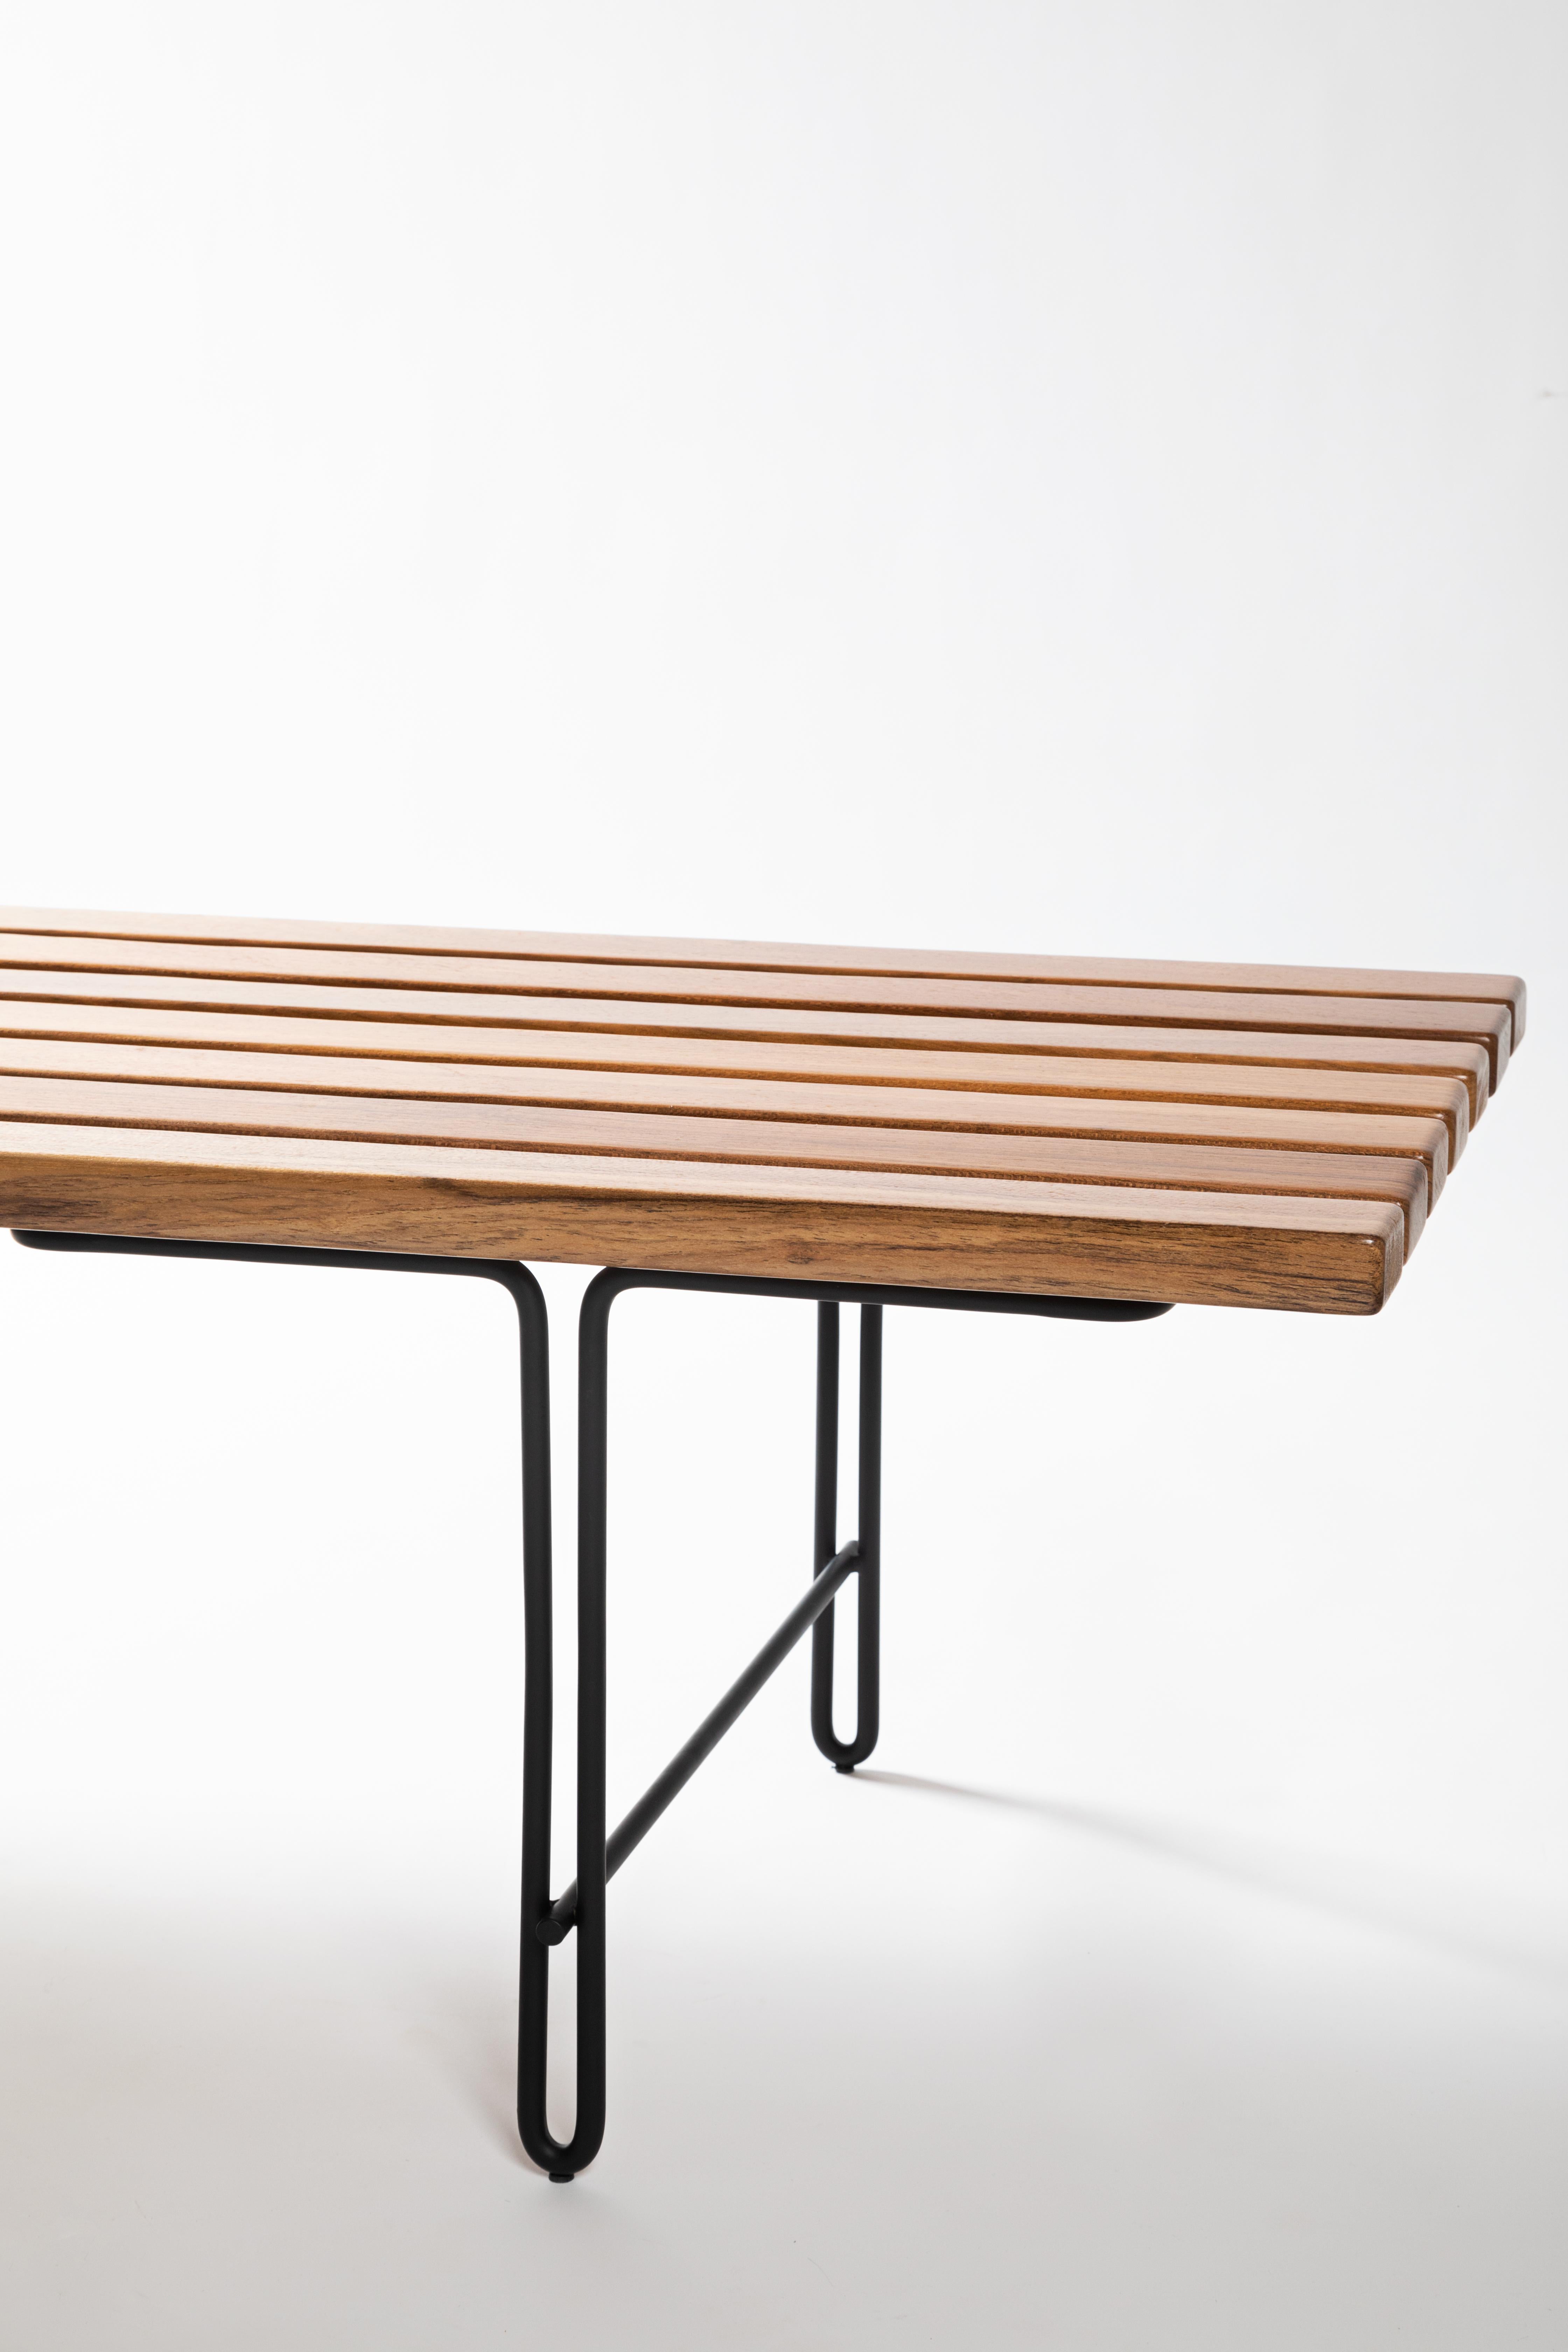 Painted Minimalist Brazilian Bench in Solid Wood 